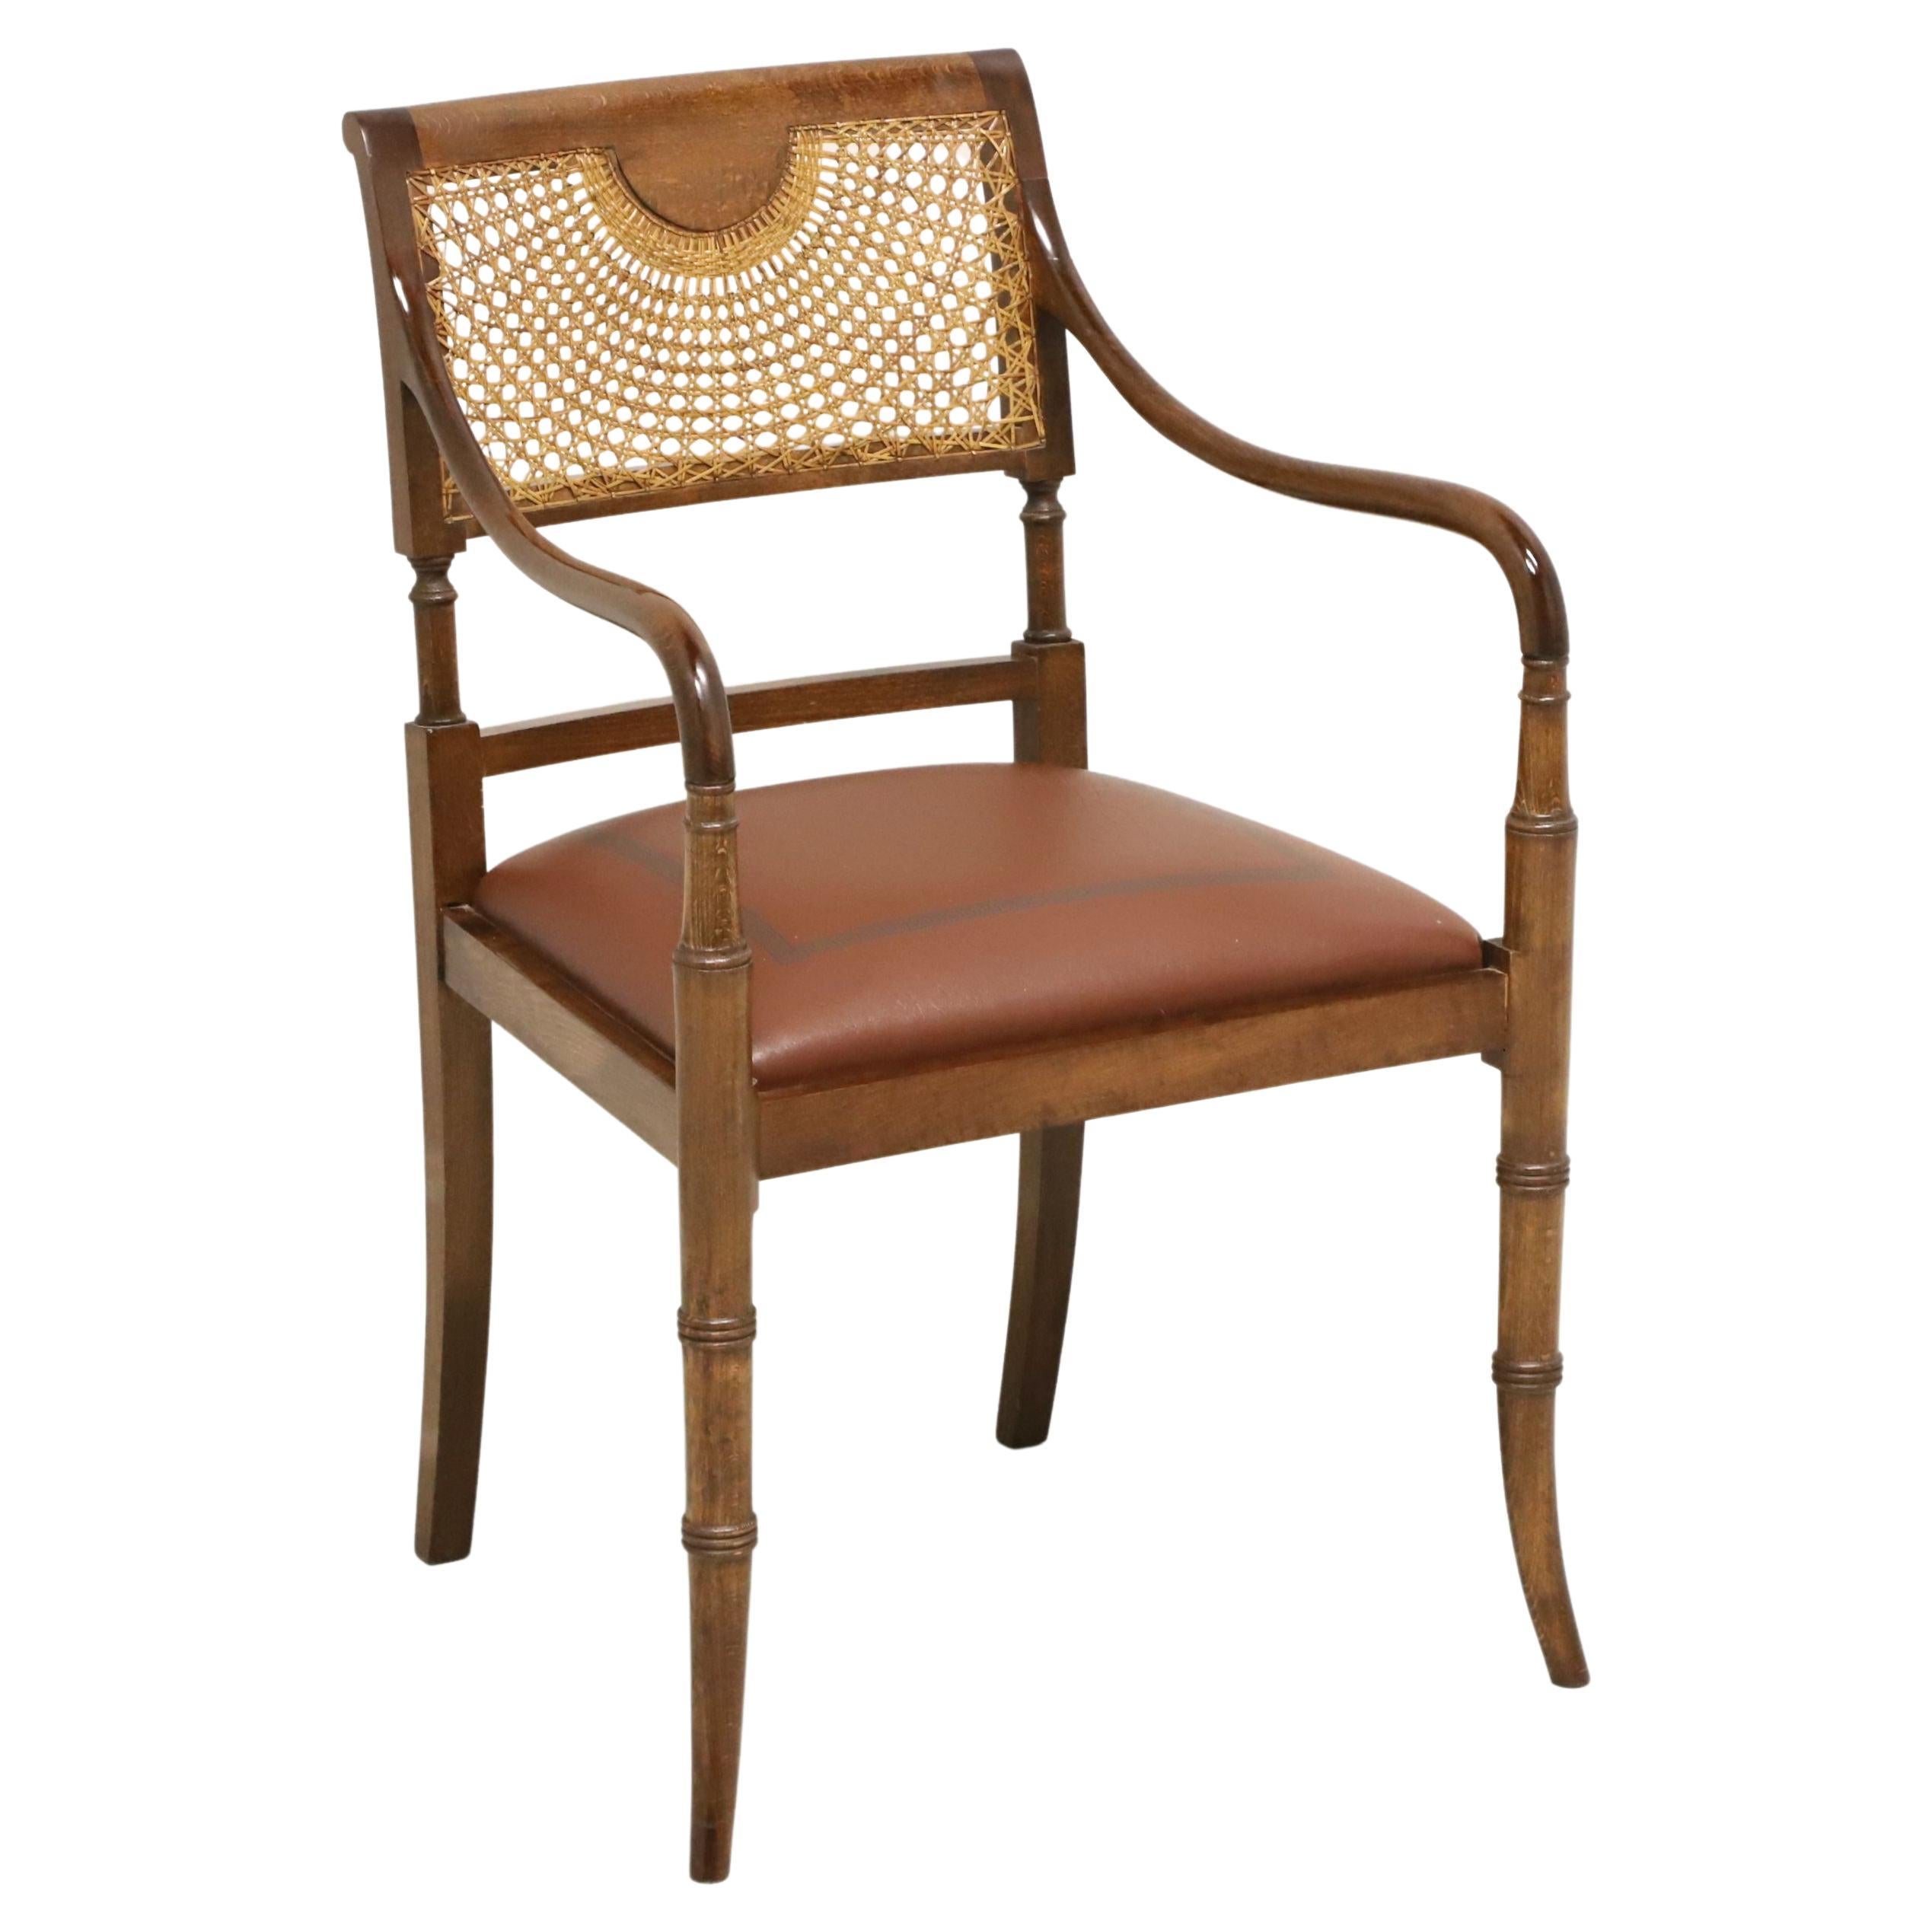 Faux Bamboo Regency Style Spider Web Cane Armchair